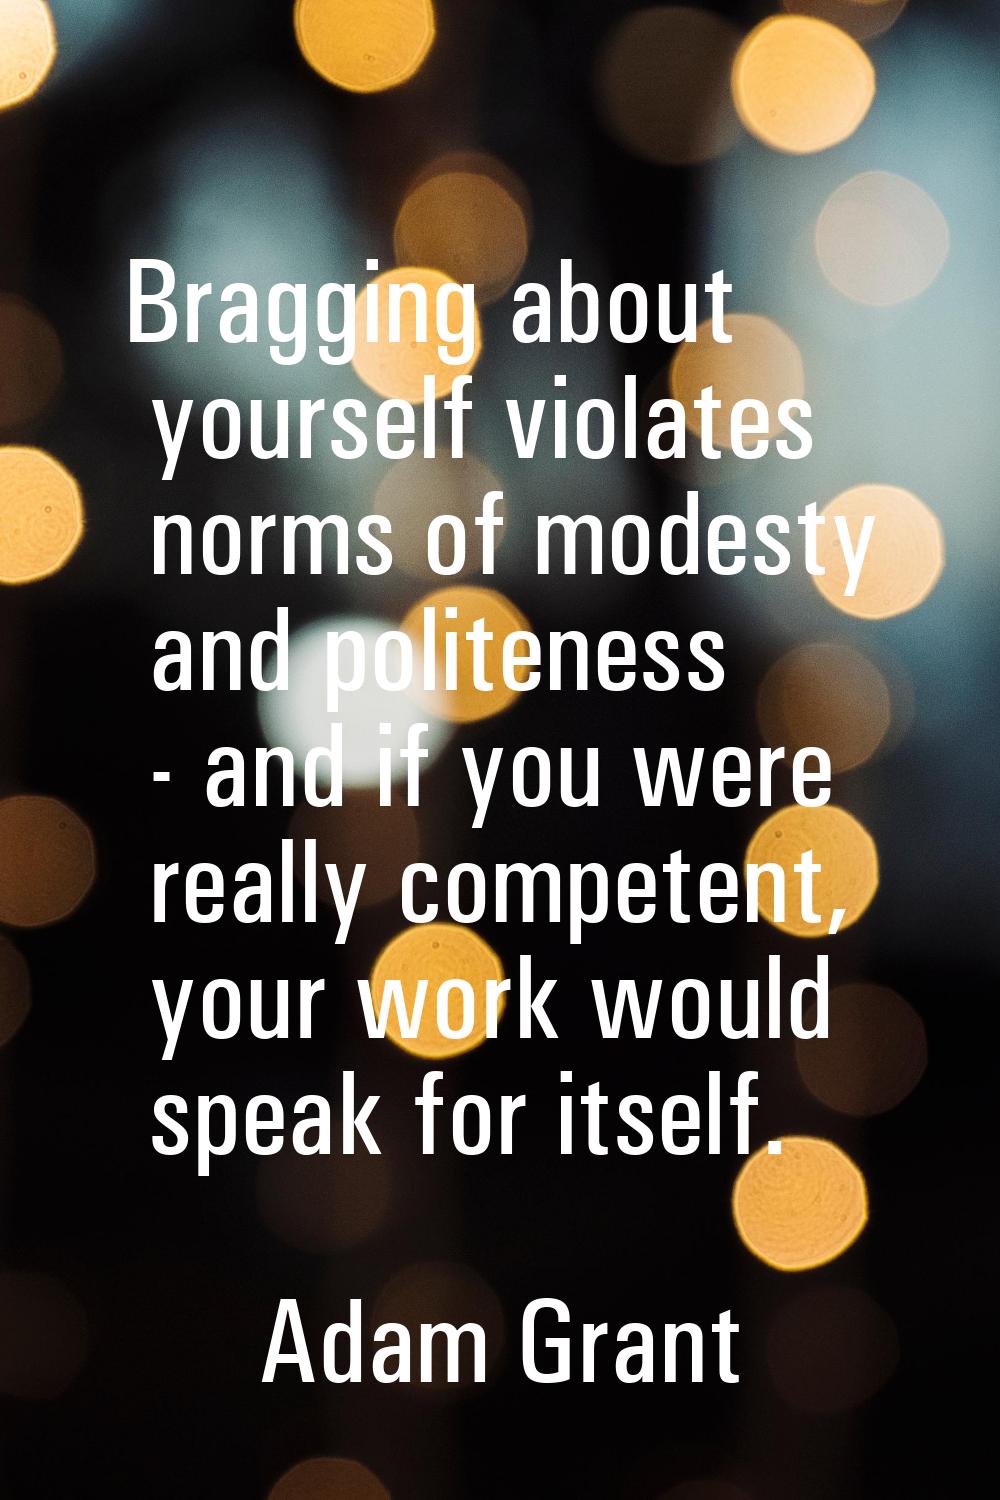 Bragging about yourself violates norms of modesty and politeness - and if you were really competent